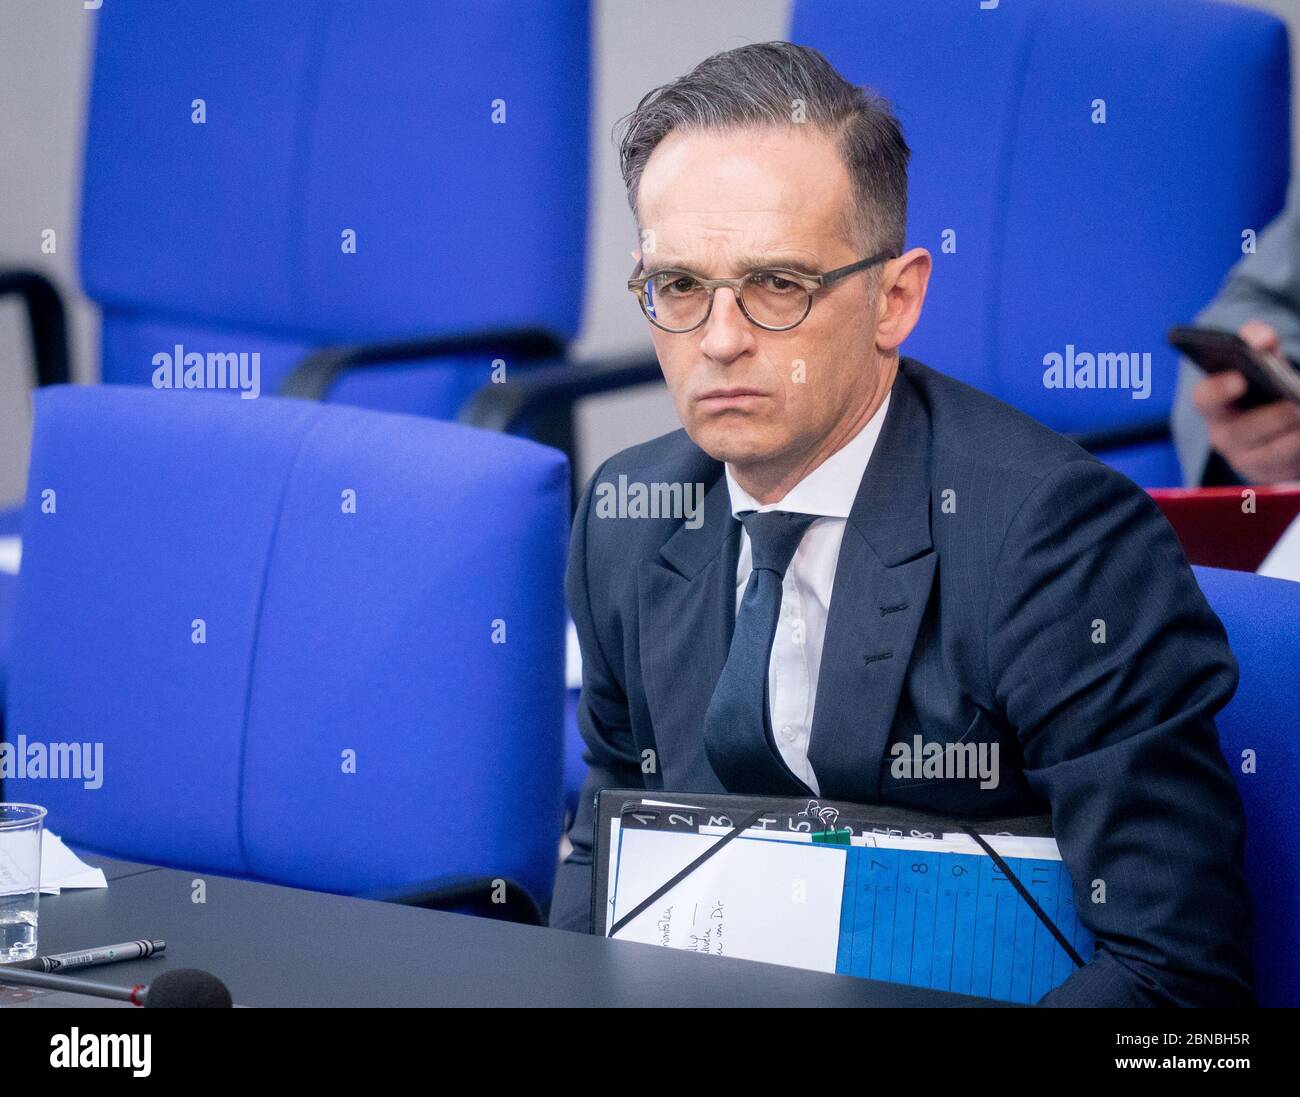 Berlin, Germany. 14th May, 2020. Heiko Maas (SPD), Foreign Minister, attends the session of the Bundestag Topics of the 160th session will include the adoption of a law on further corona measures in the health care system, the adoption of a law to increase short-time work compensation and ESM credit lines for corona aid in the euro zone. Credit: Kay Nietfeld/dpa/Alamy Live News Stock Photo